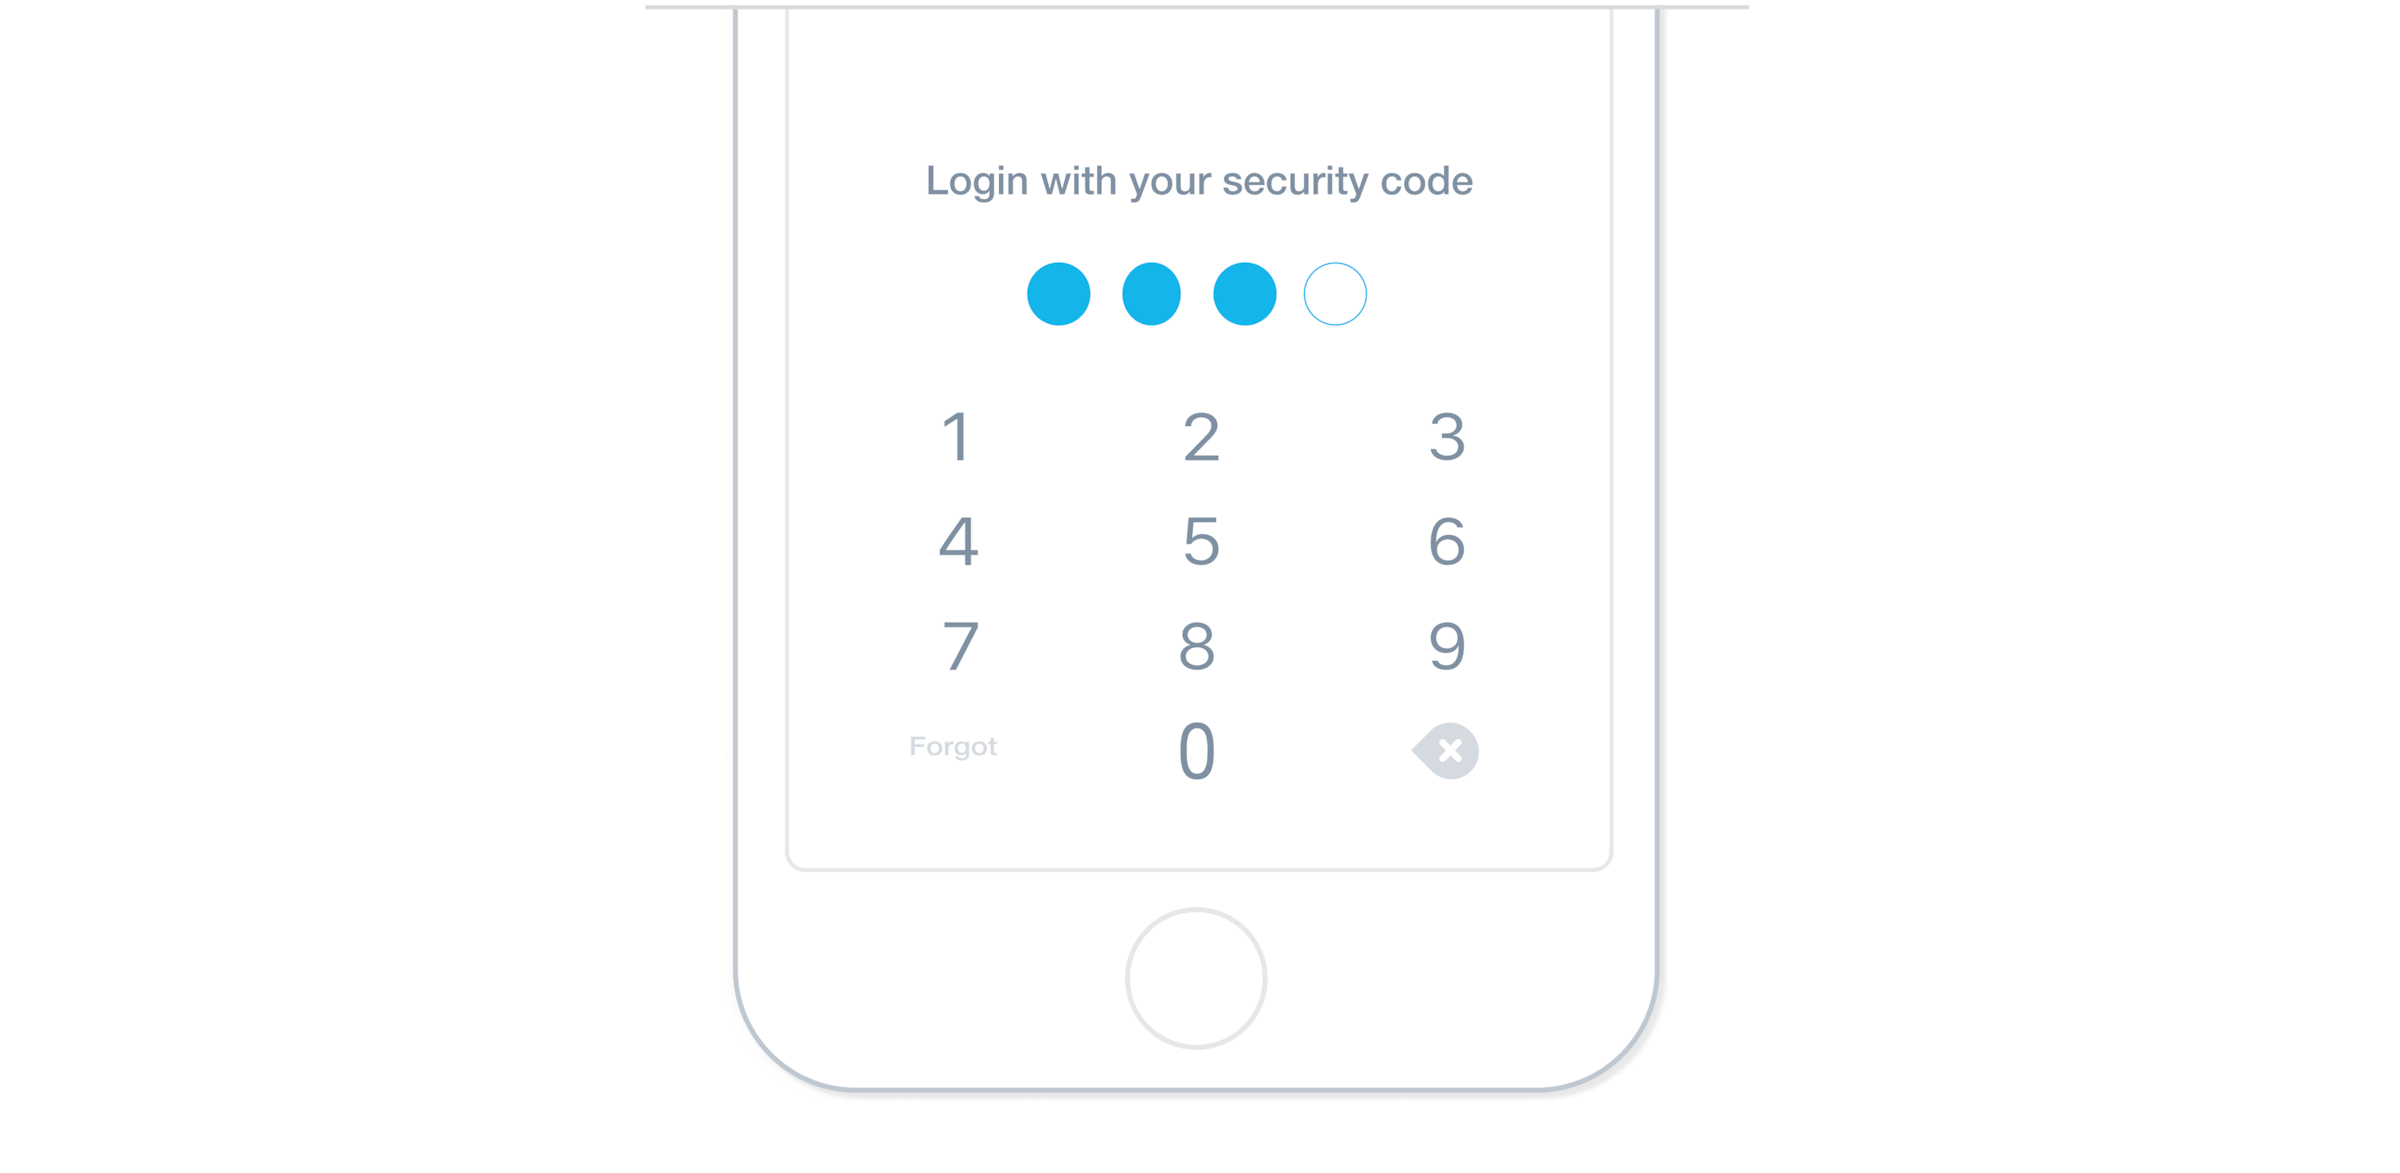 The Xero mobile app shows a screen asking a user to log in with their security code for an additional layer of security. 